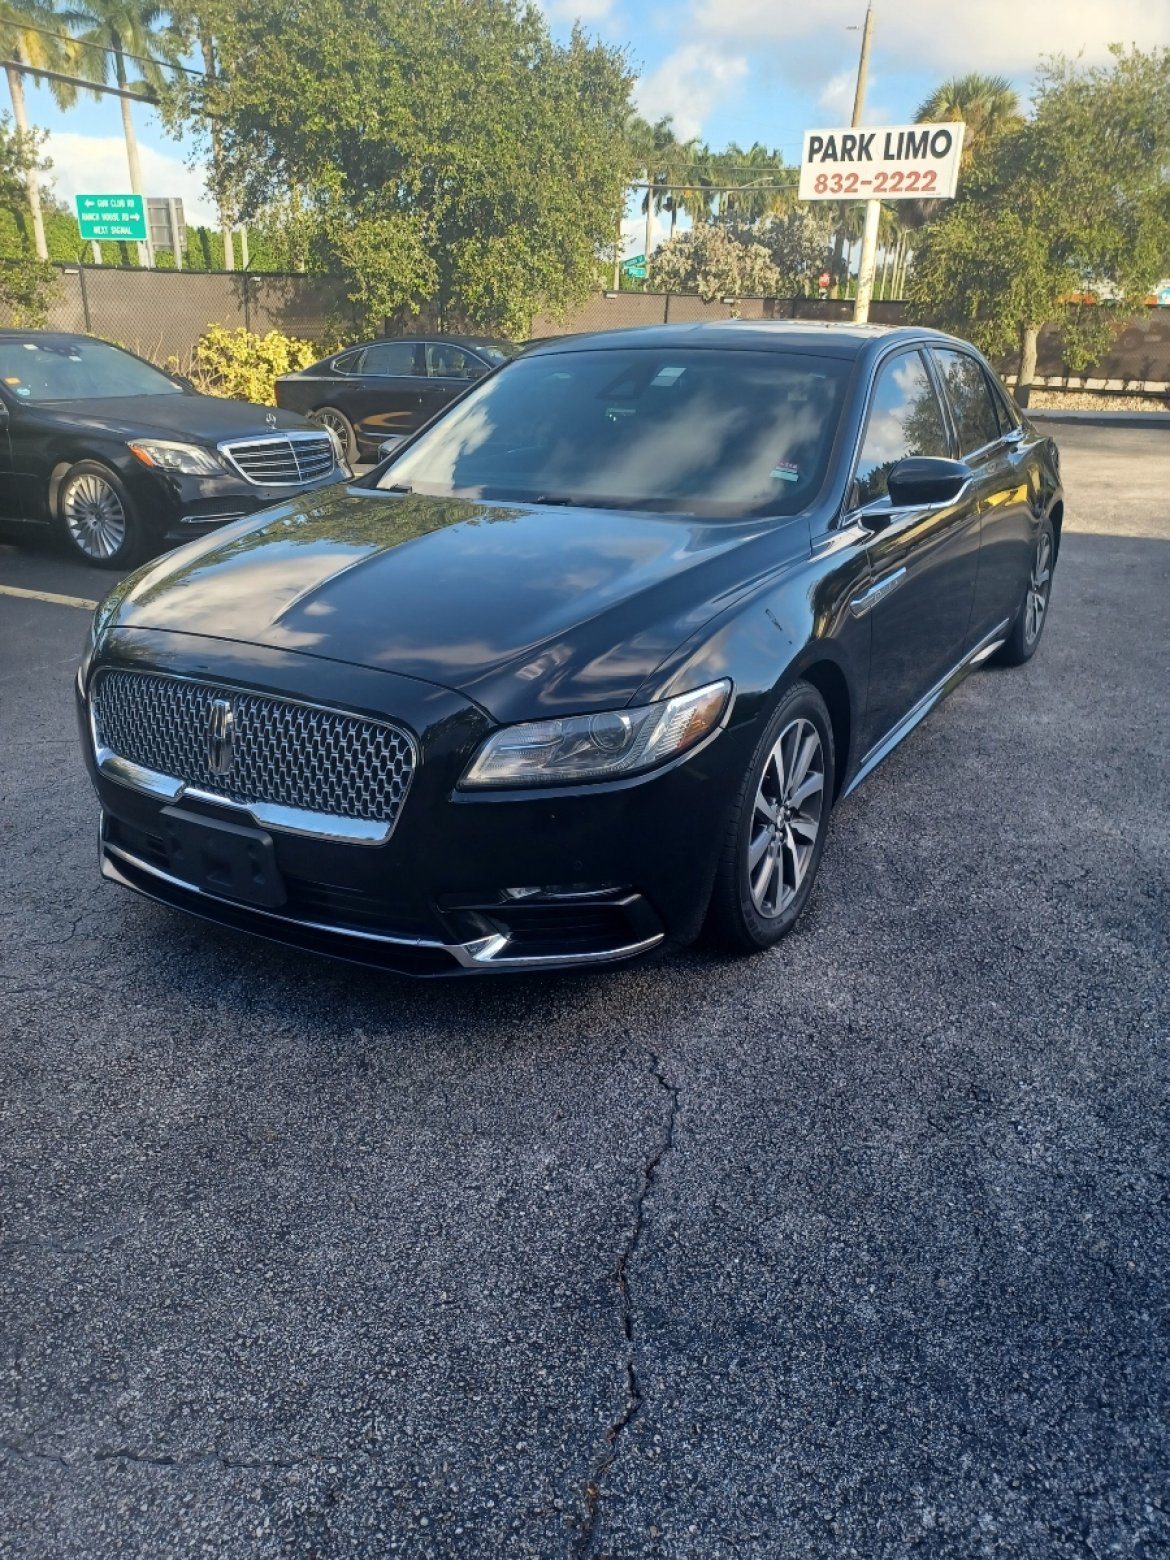 Sedan for sale: 2019 Lincoln Continental by Lincoln